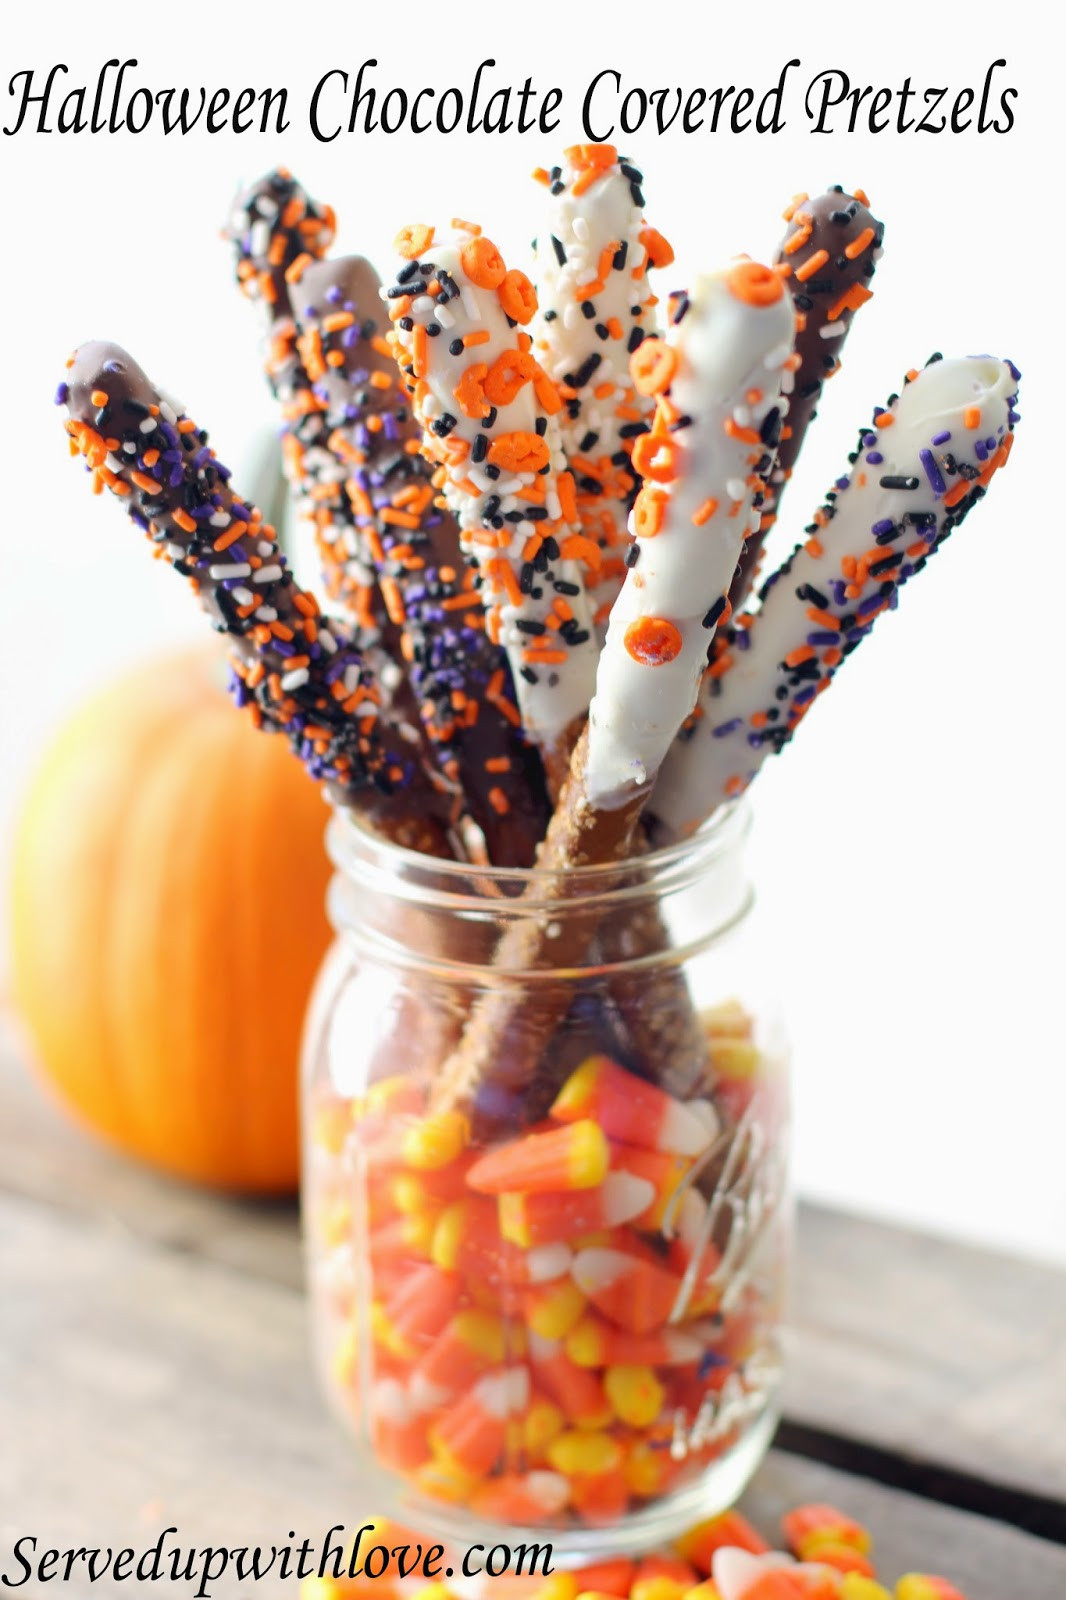 Chocolate Covered Pretzels Halloween
 Served Up With Love Halloween Chocolate Covered Pretzels